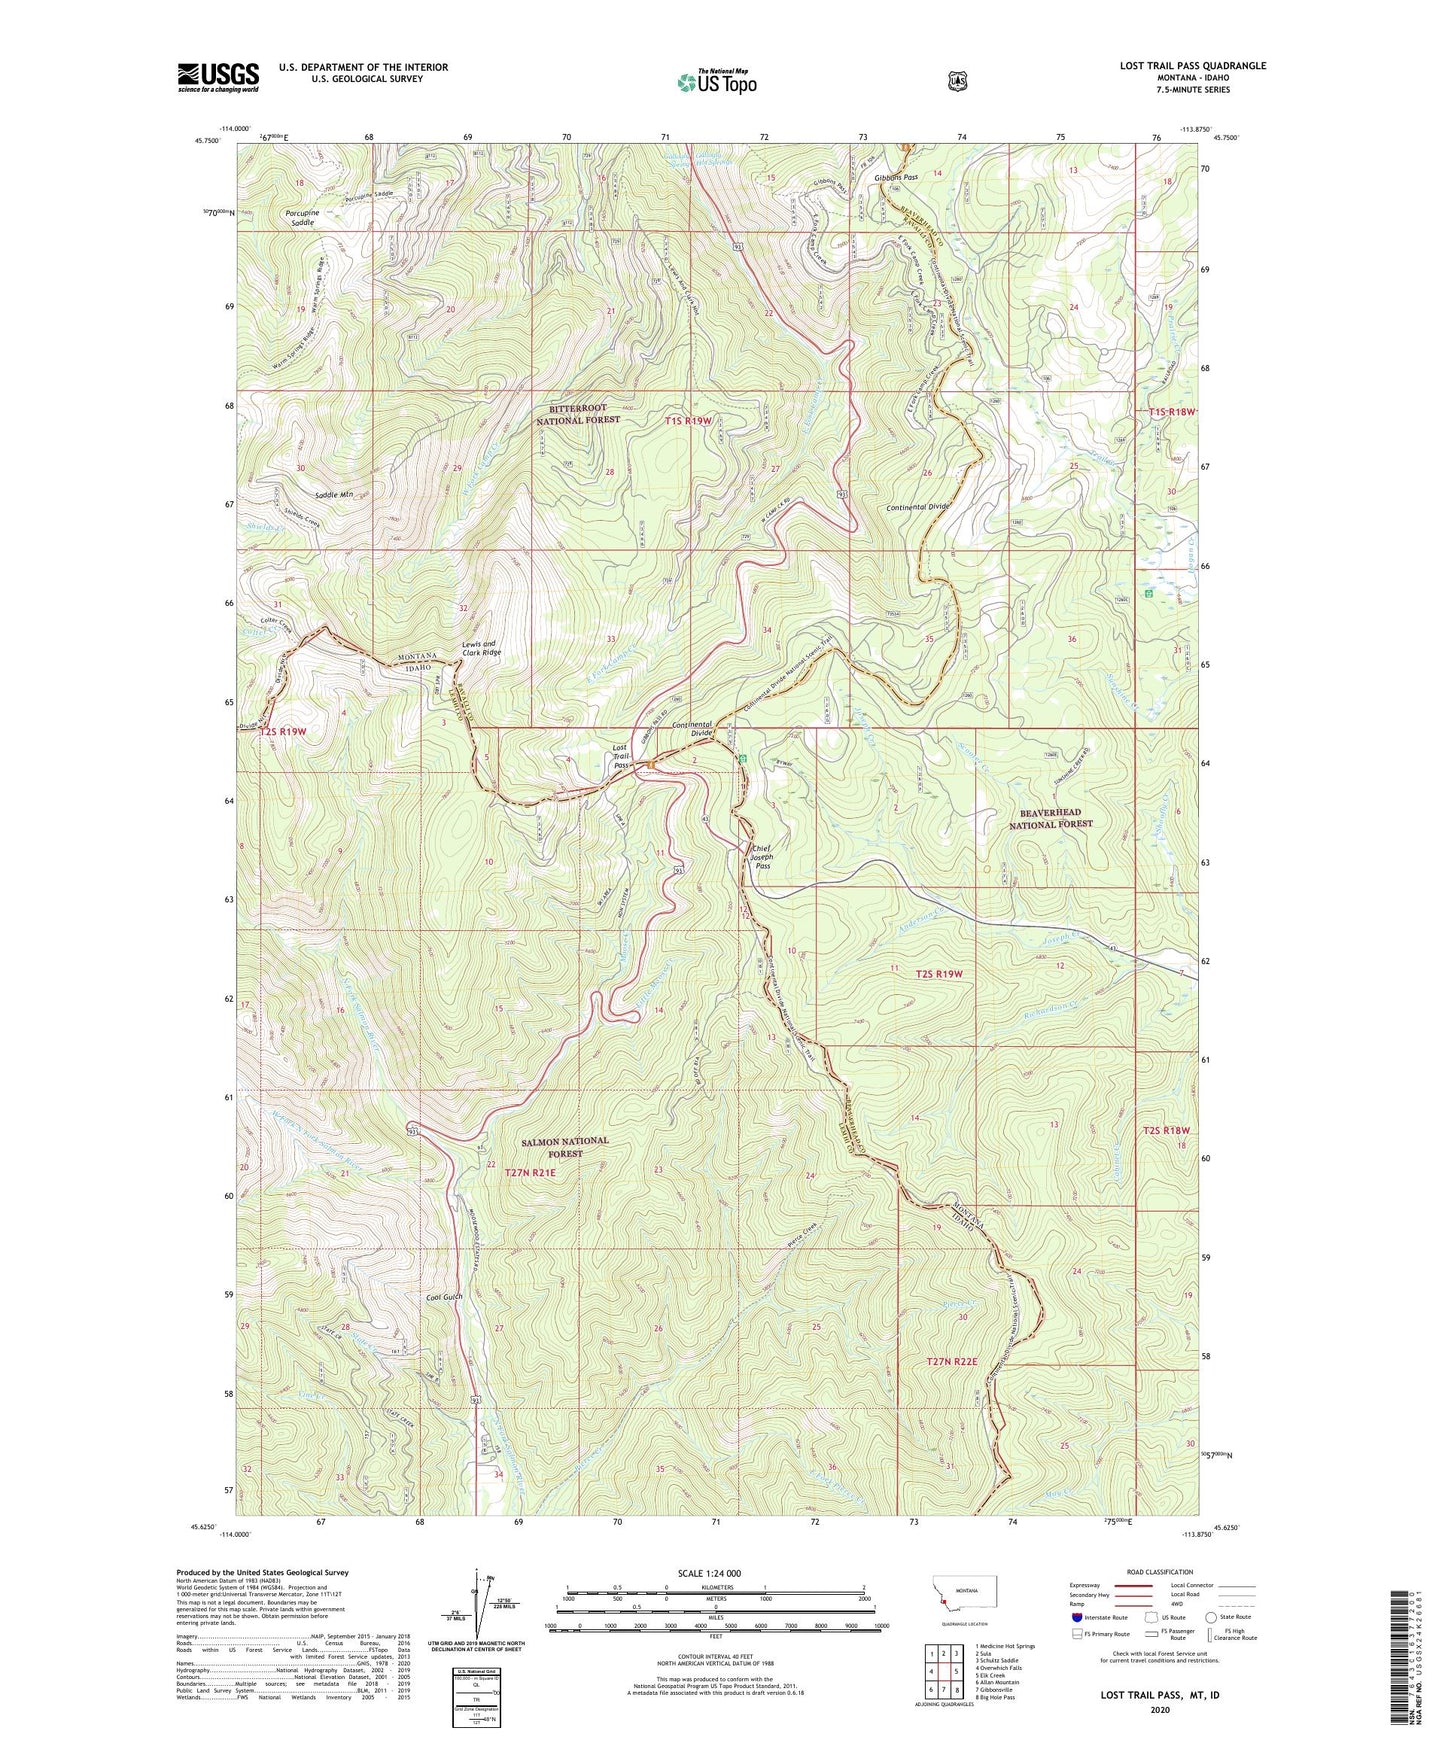 Lost Trail Pass Montana US Topo Map Image